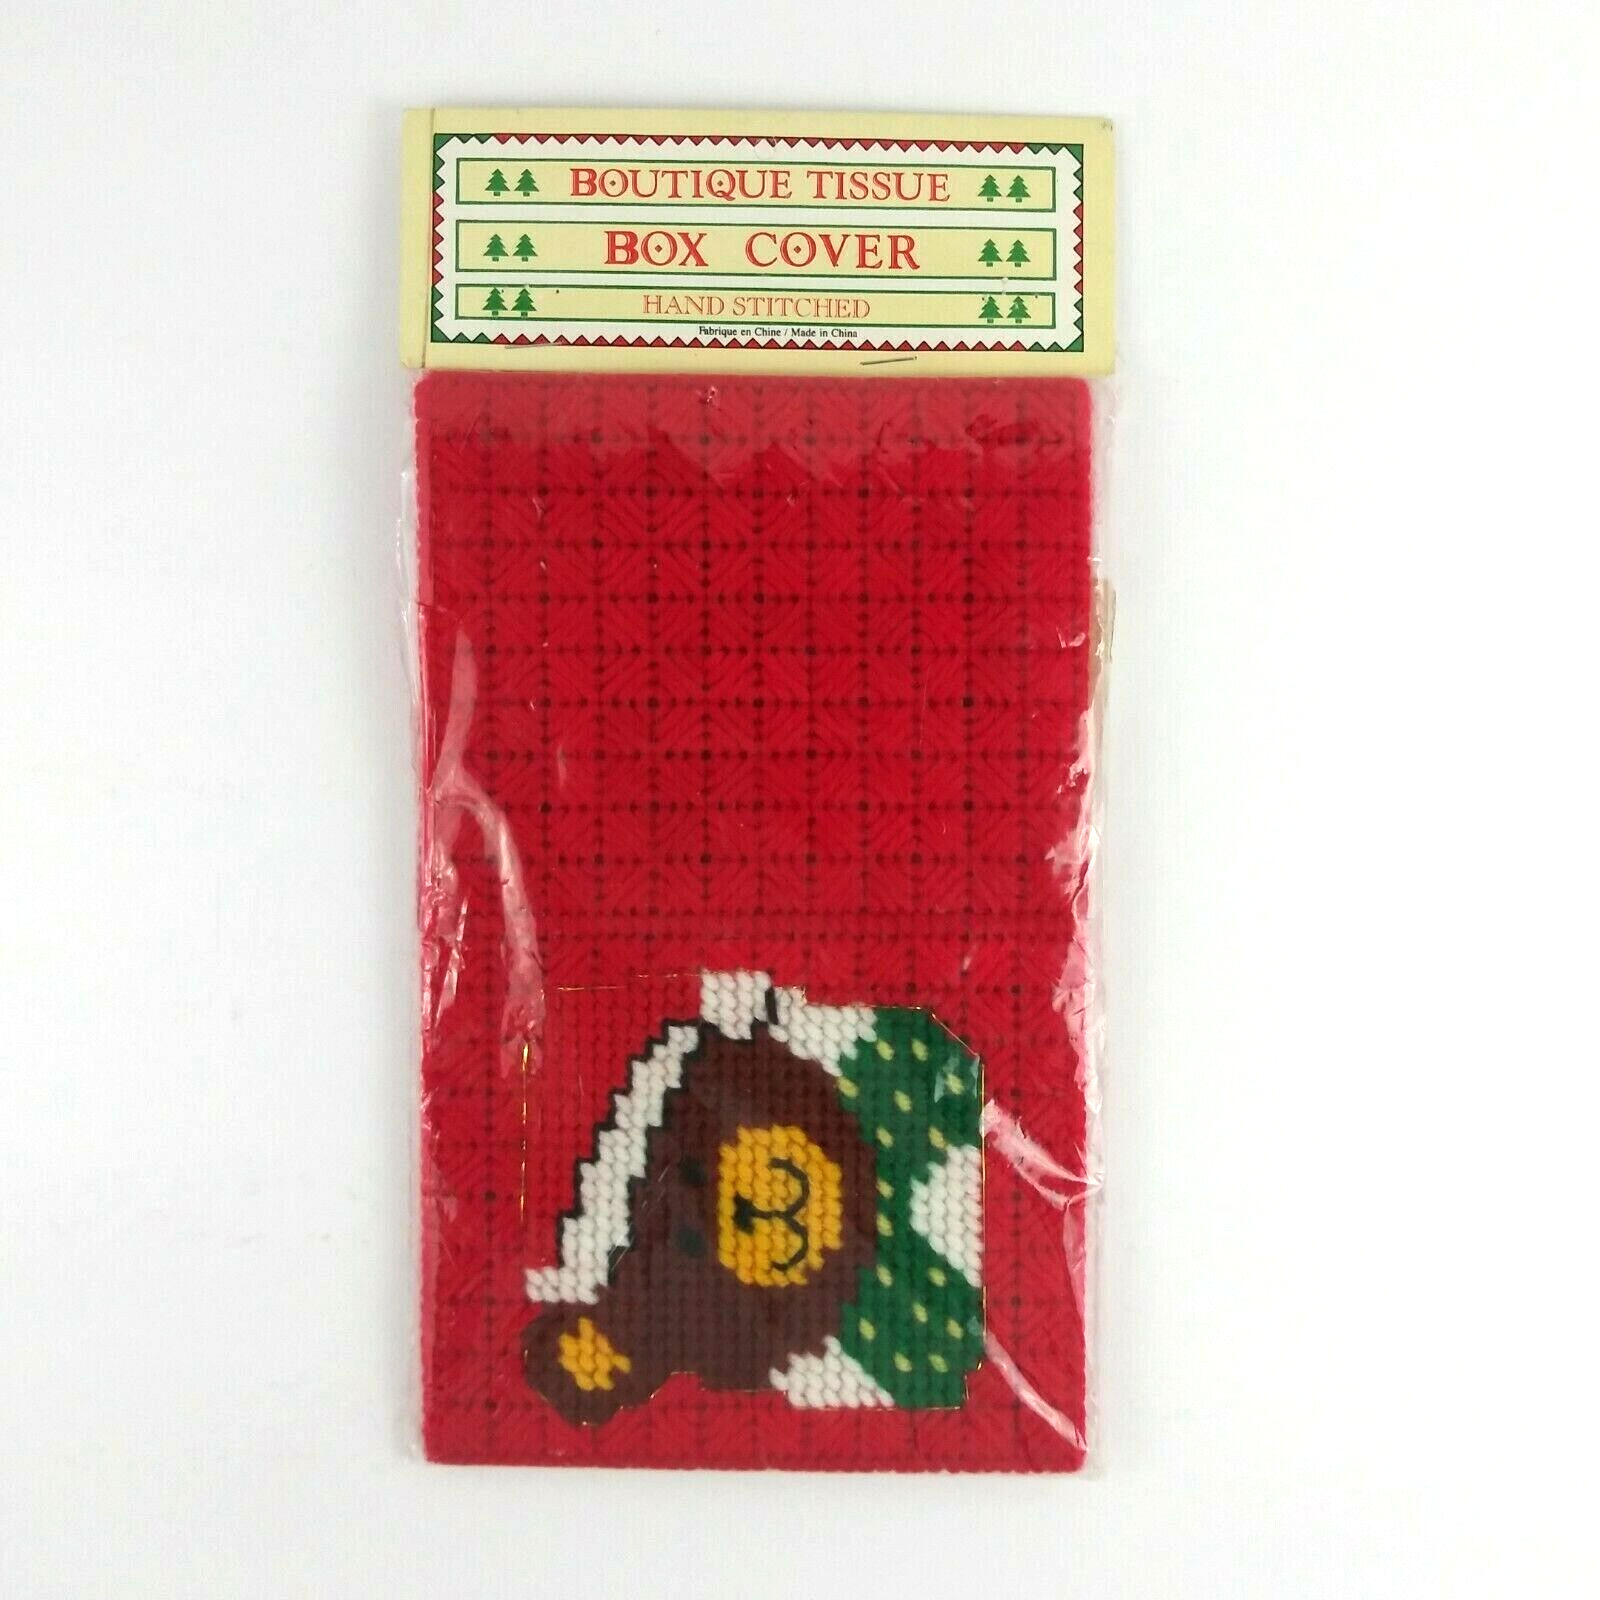 Vintage Tissue Box Cover Hand Stitched Needlepoint Red Teddy Bear Christmas